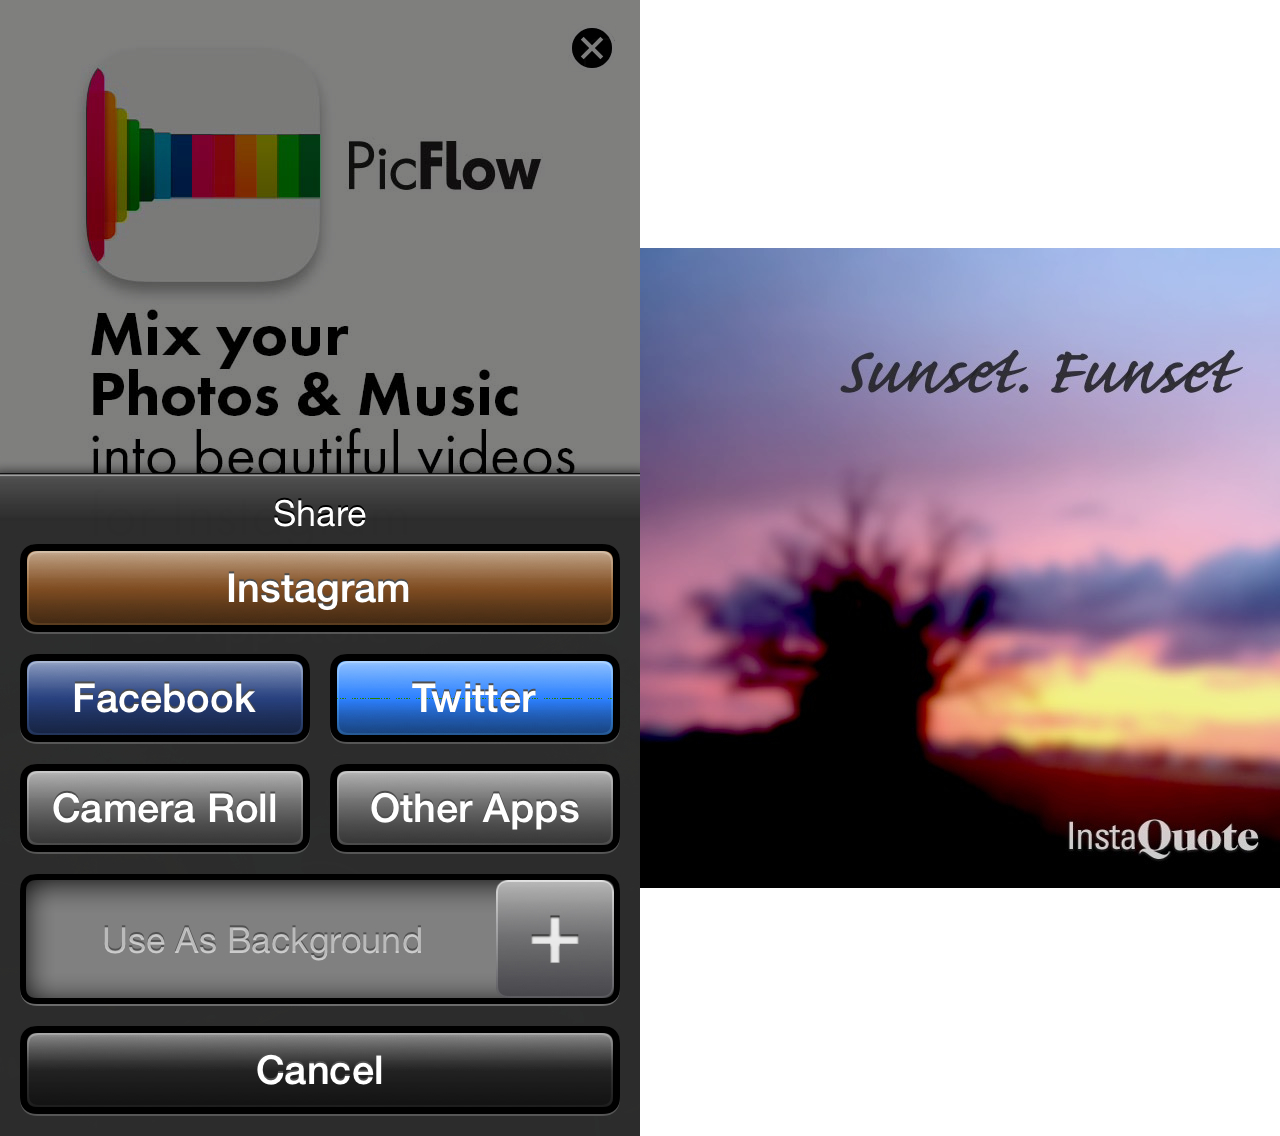 How to Add Quotes to Instagram Photos